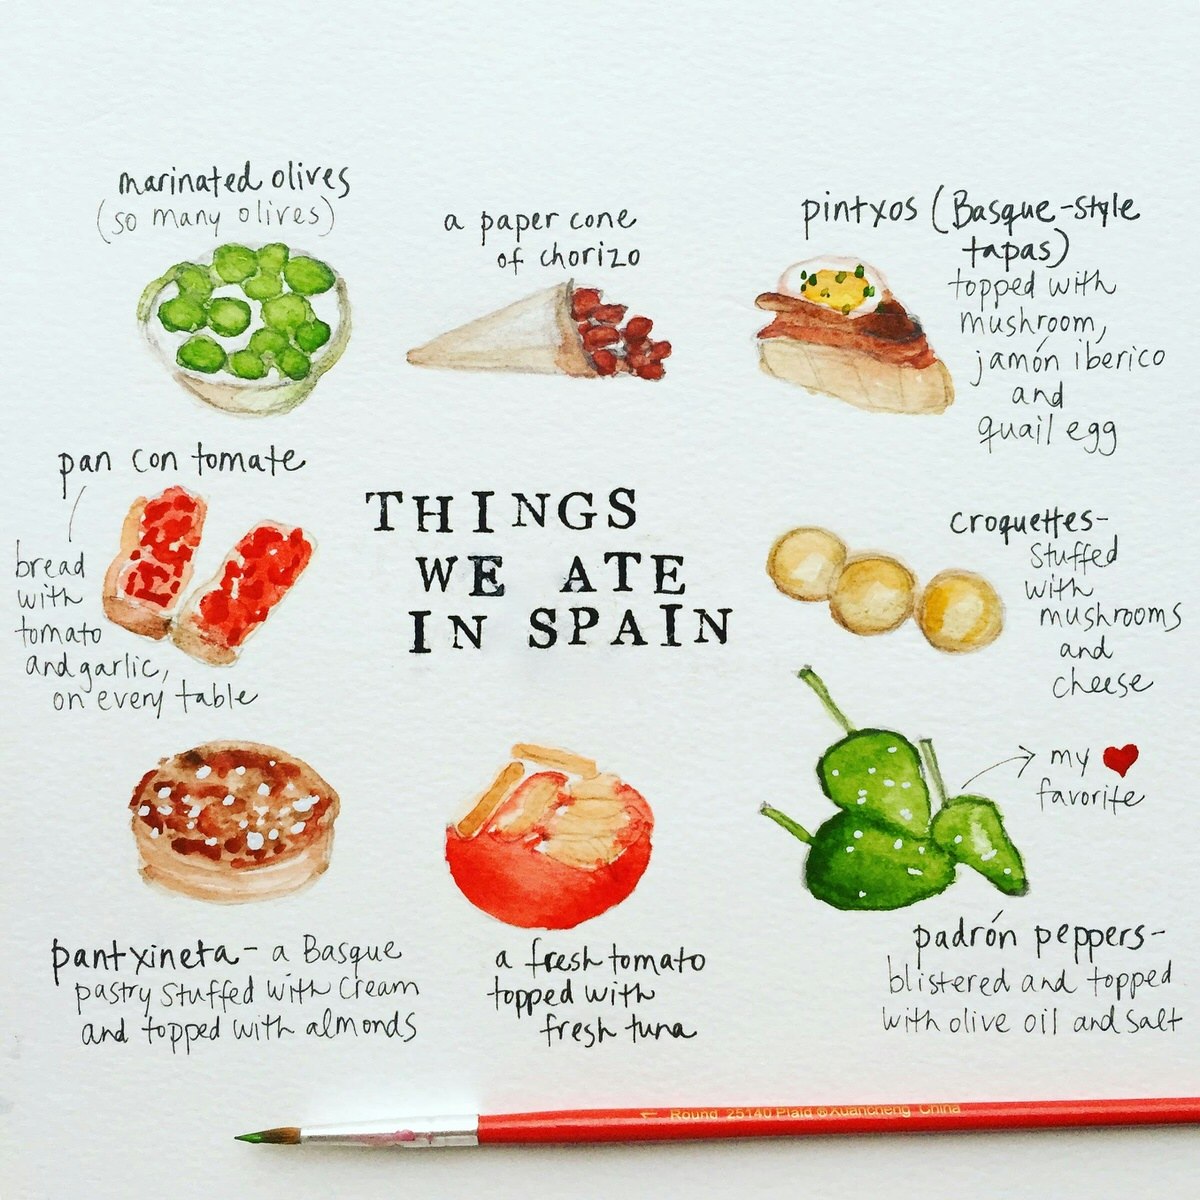 The writer's sketch of things she ate in Spain